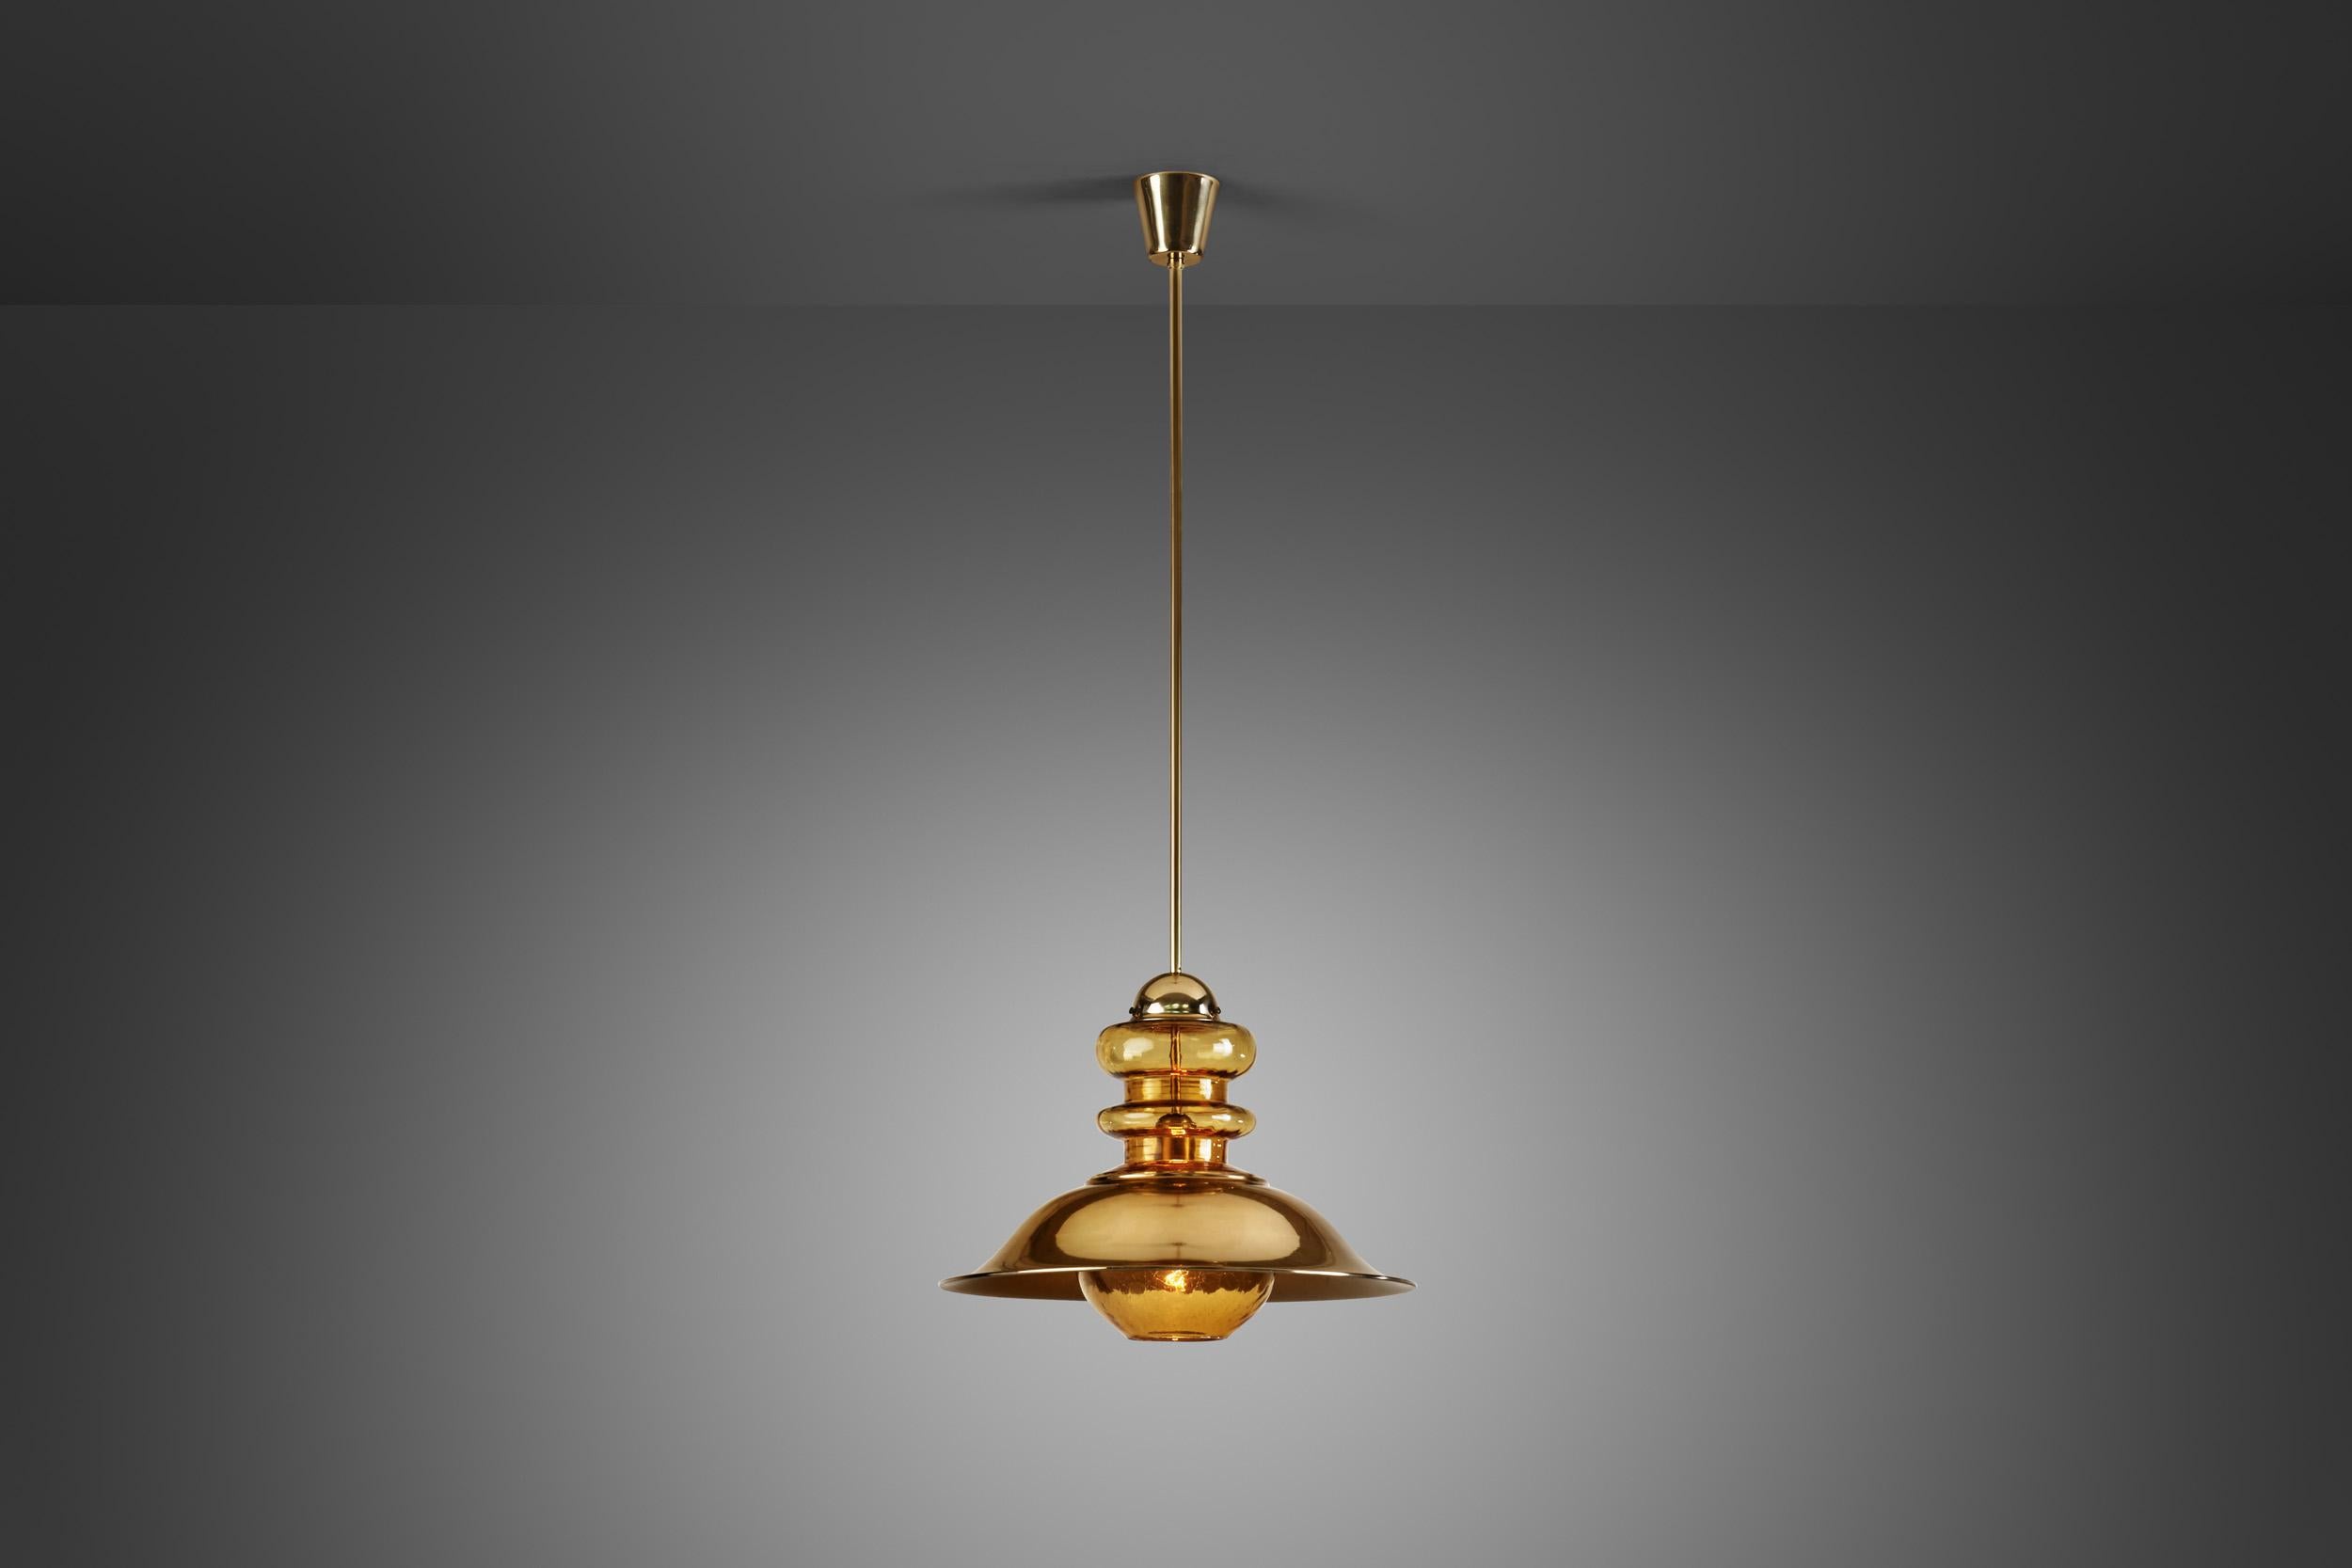 This unique ceiling lamp is the result of an era when old and new influences interacted actively, combining traditional methods and looks with the 20th century’s design movements’ peculiar aesthetic. As this lamp shows, the one-of-a-kind, often